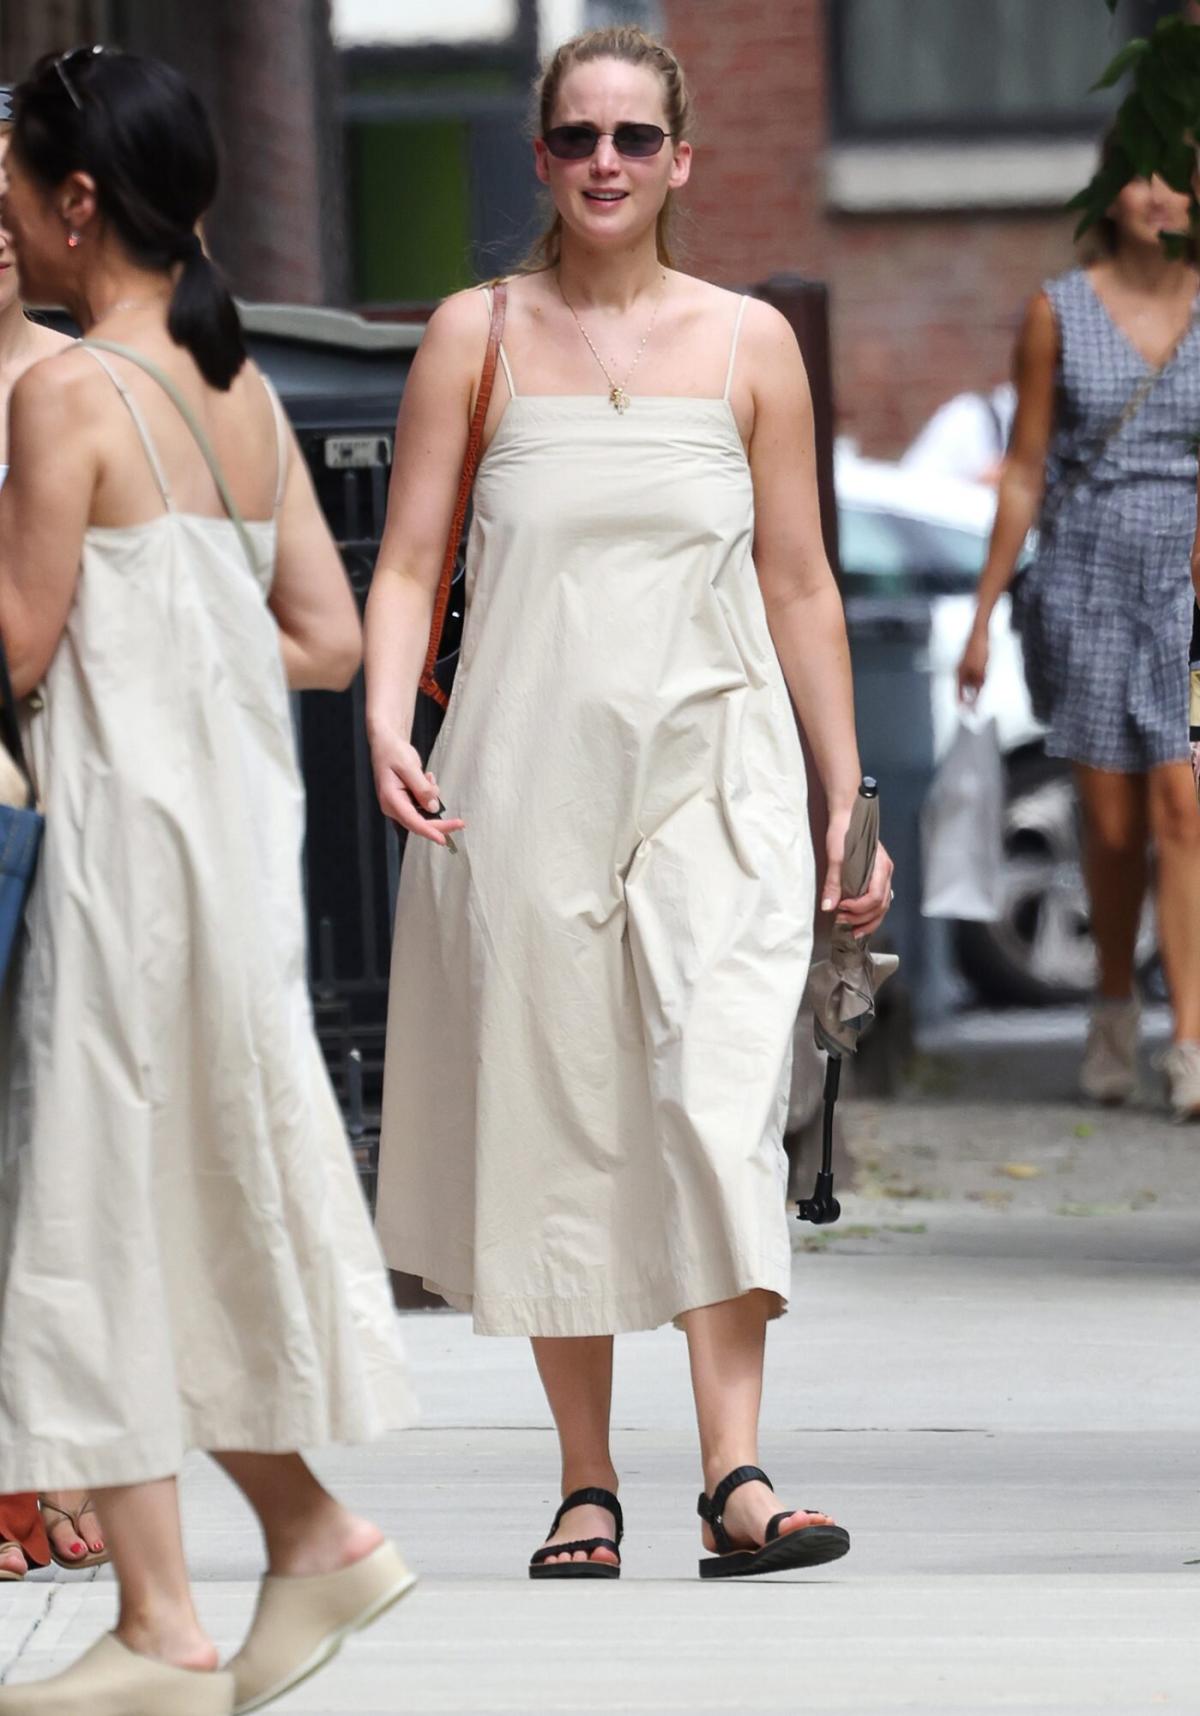 Jennifer Lawrence Wore Wide-Leg Jeans in NYC, Shop 8 Similar Pairs